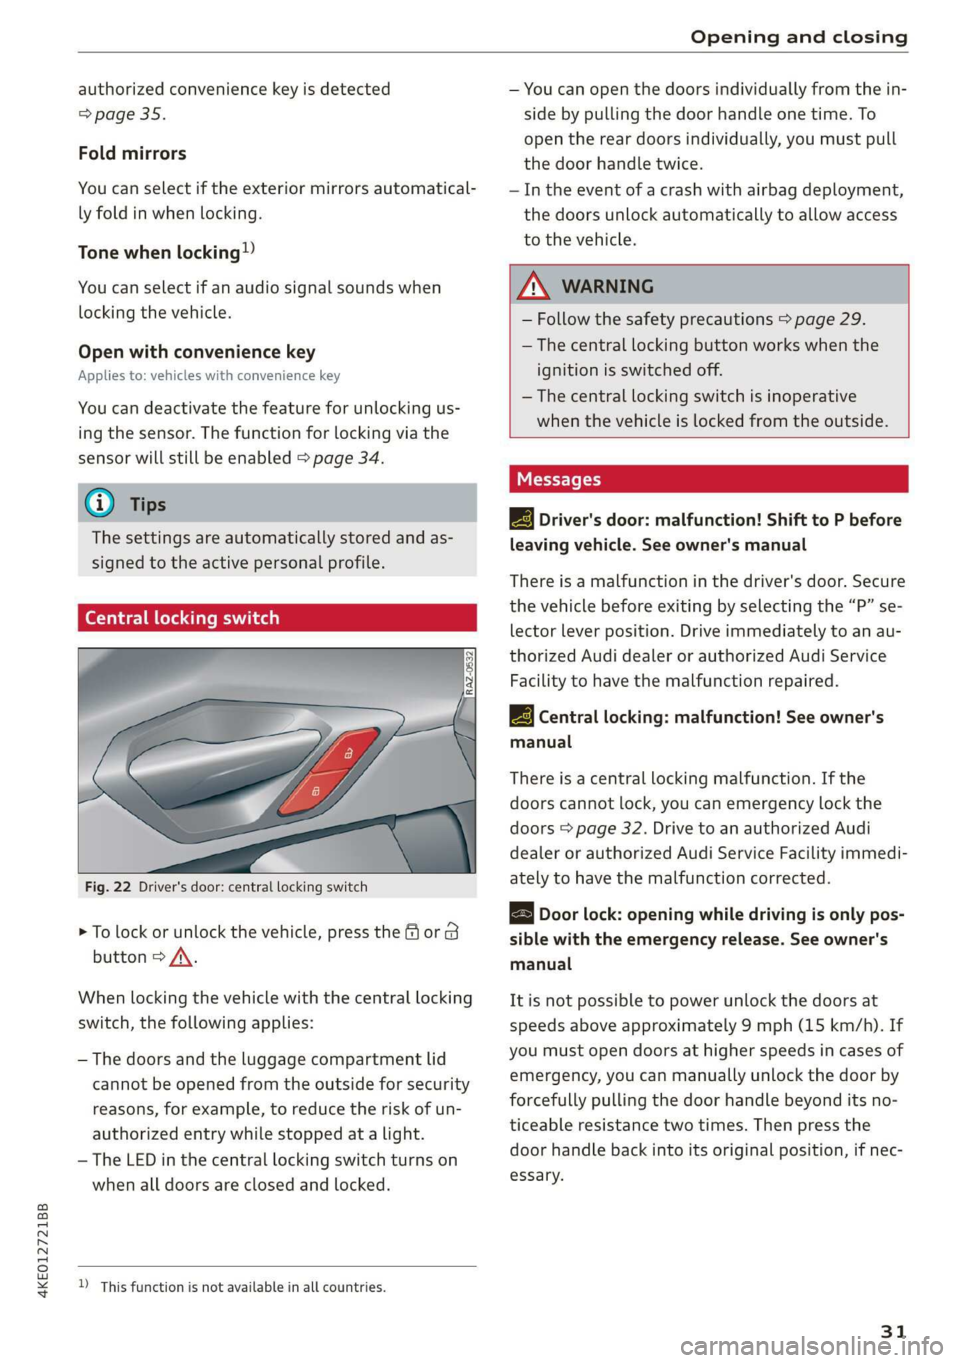 AUDI E-TRON 2019  Owners Manual 4KE012721BB 
Opening and closing 
  
authorized convenience key is detected 
=> page 35. 
Fold mirrors 
You can select if the exterior mirrors automatical- 
ly fold in when locking. 
Tone 
when lockin